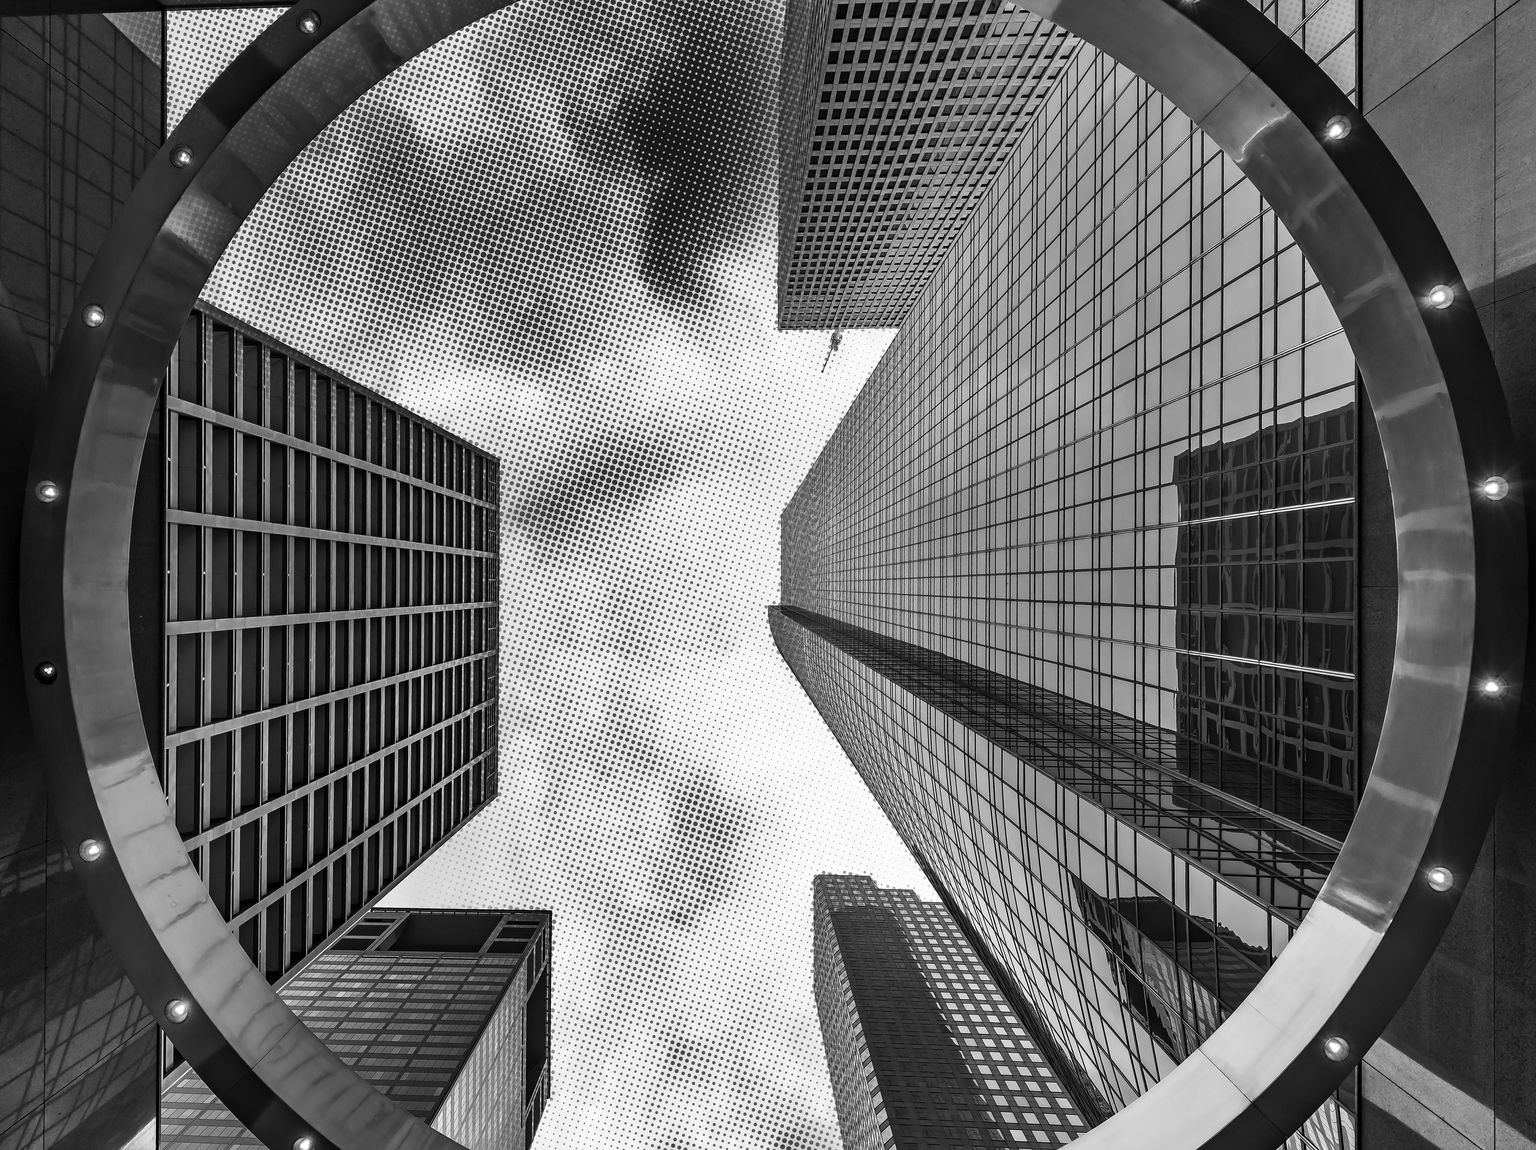 Black and white photo of downtown Houston architecture with a halftone graphic applied.